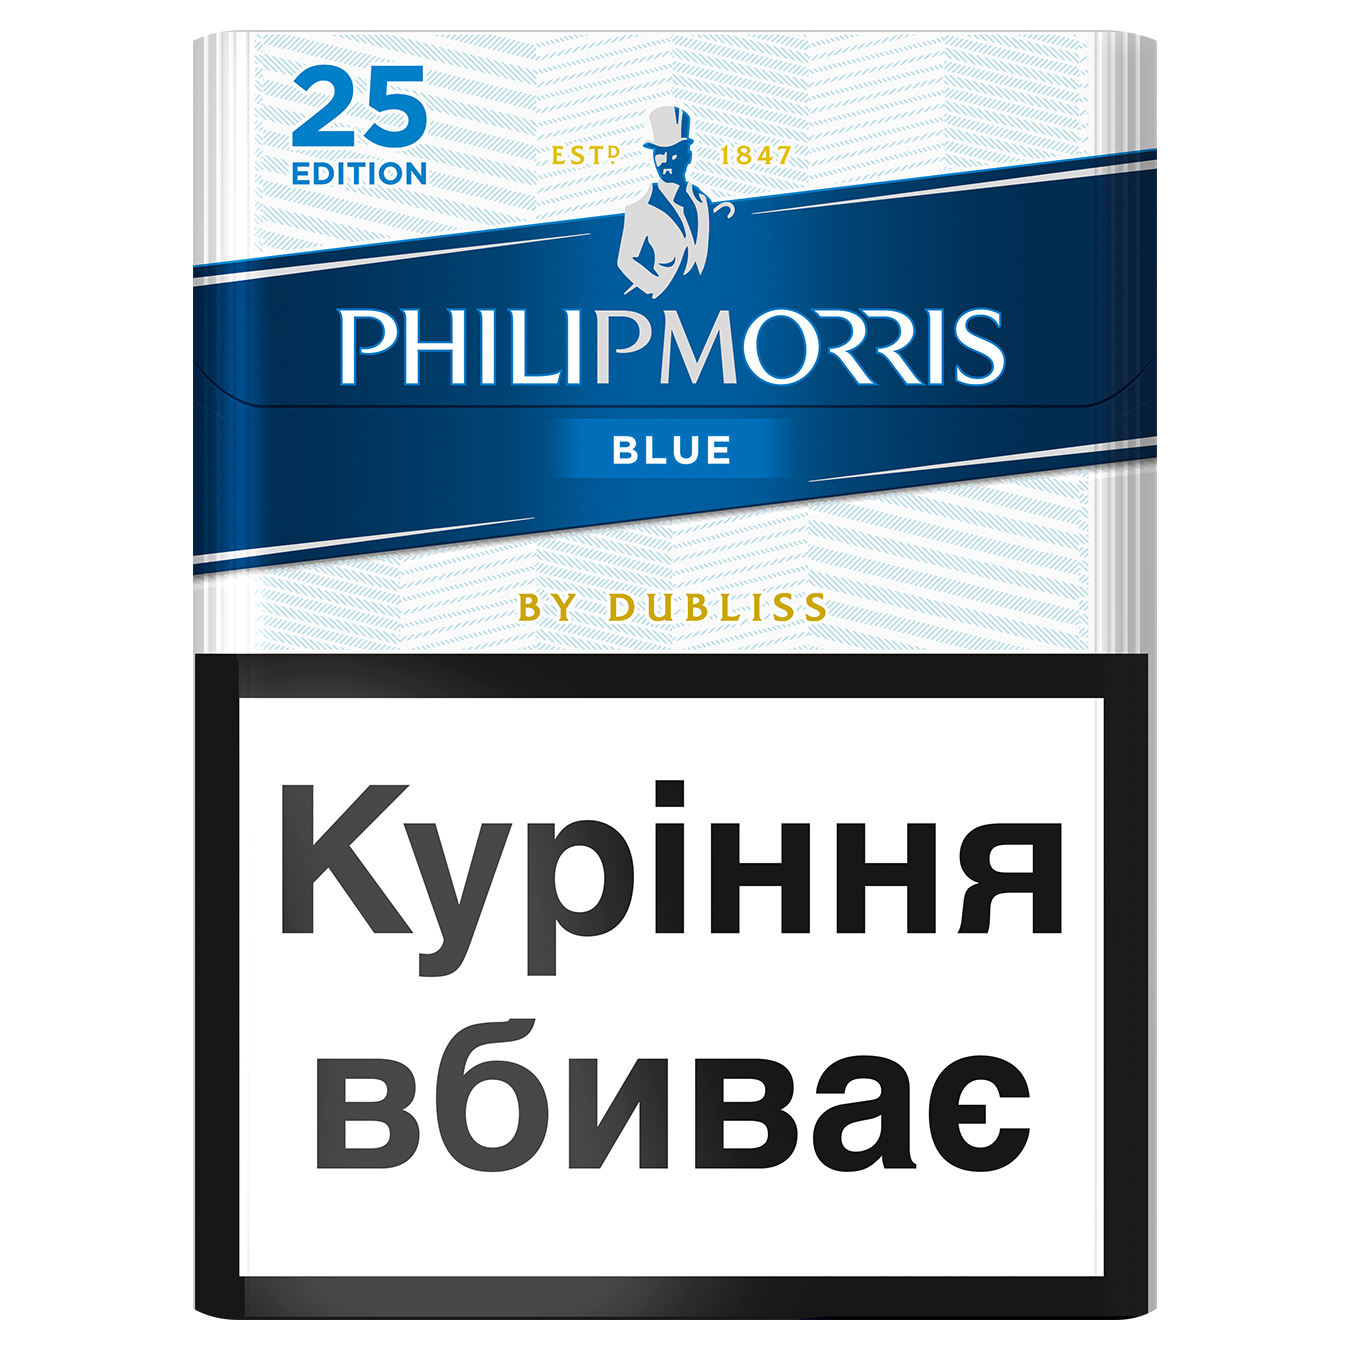 Philip Morris Blue Cigarettes 25 Edition 25pcs (the price is indicated without excise tax)